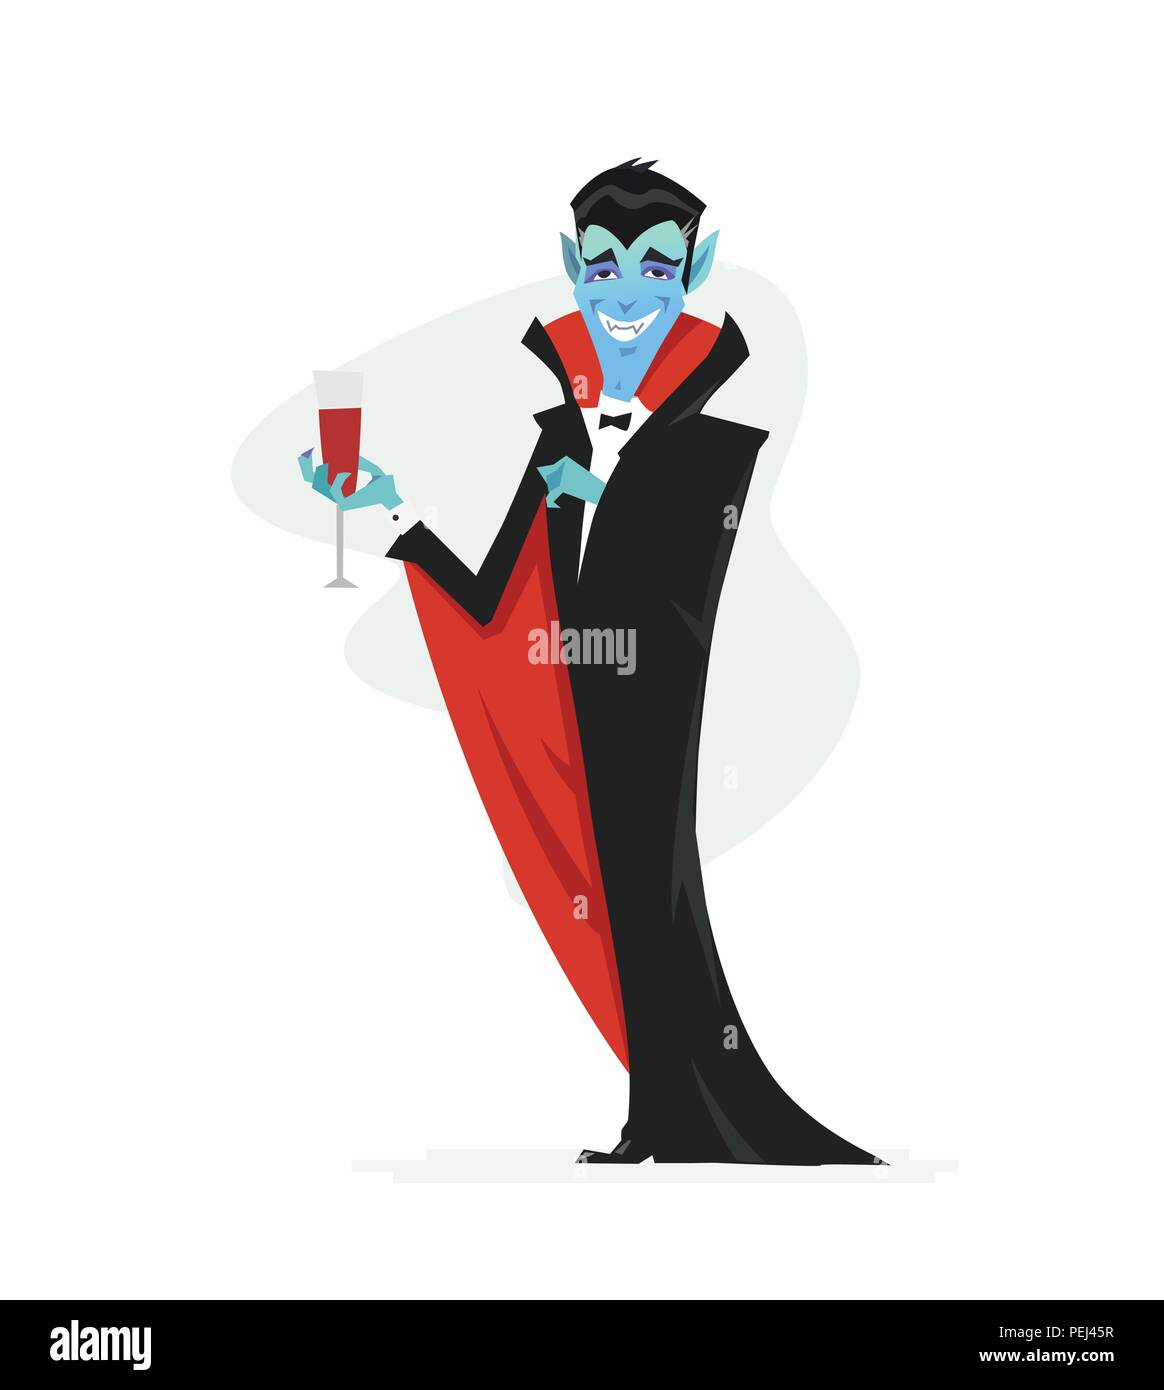 1,250 Vampire Cartoon Characters Stock Photos, High-Res Pictures